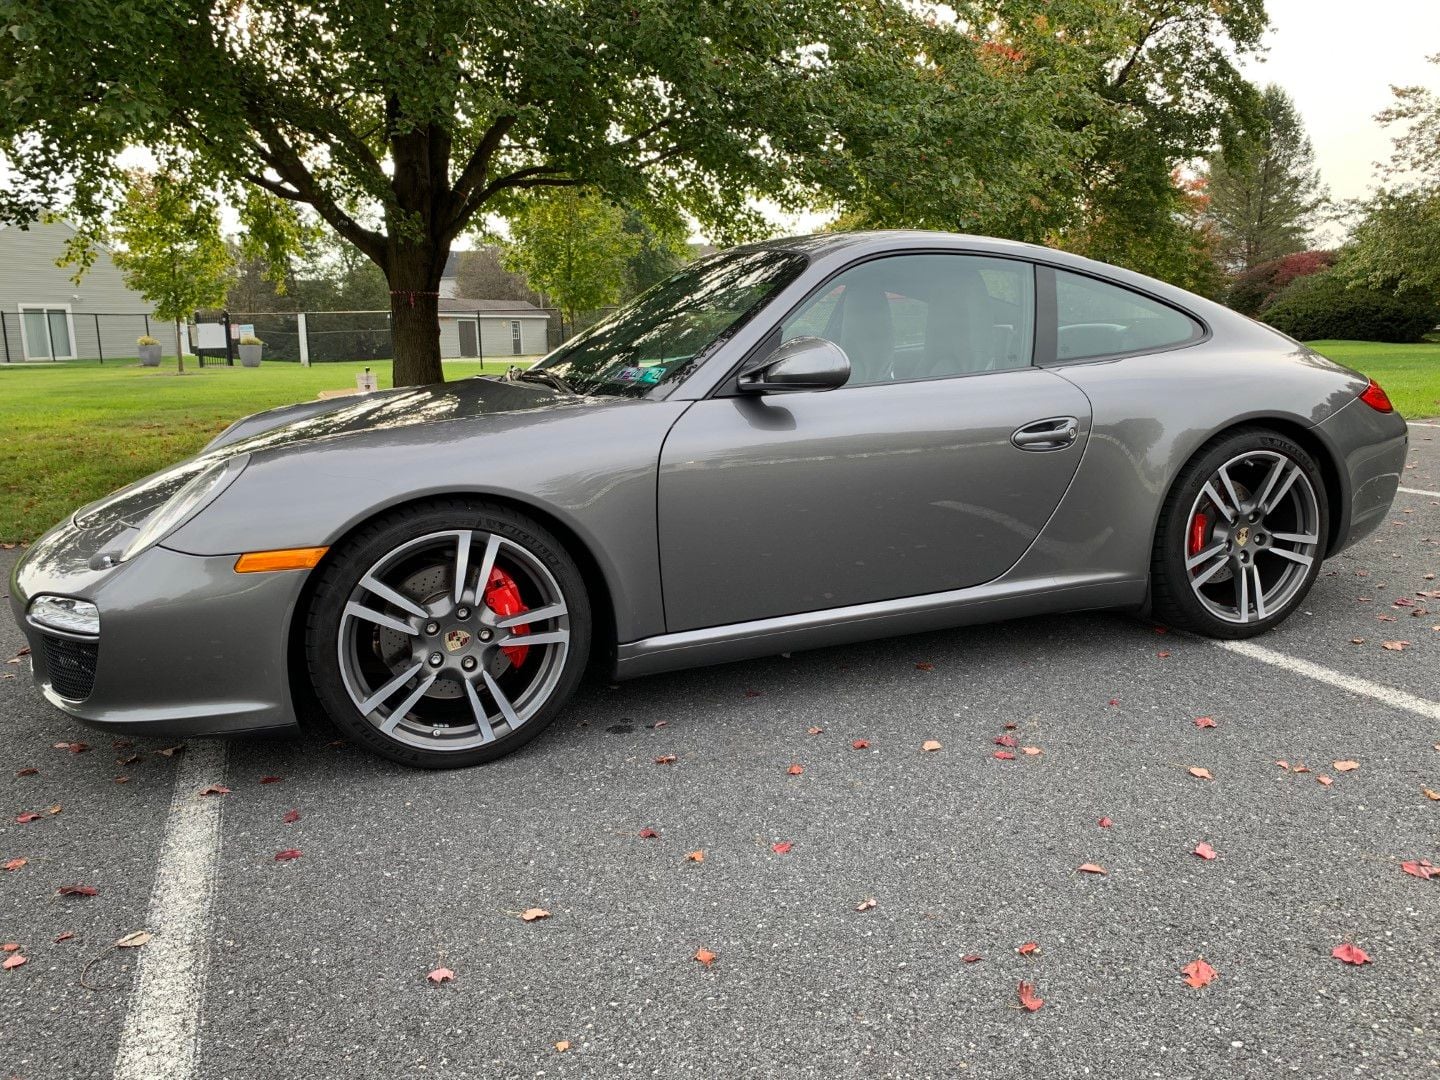 2011 Porsche 911 - 2011 Porsche 911 Carrera S (997.2), 6-speed, sports suspension, 30K miles - Used - VIN WP0AB2A92BS720754 - 30,500 Miles - 6 cyl - 2WD - Manual - Coupe - Gray - Reading, PA 19610, United States